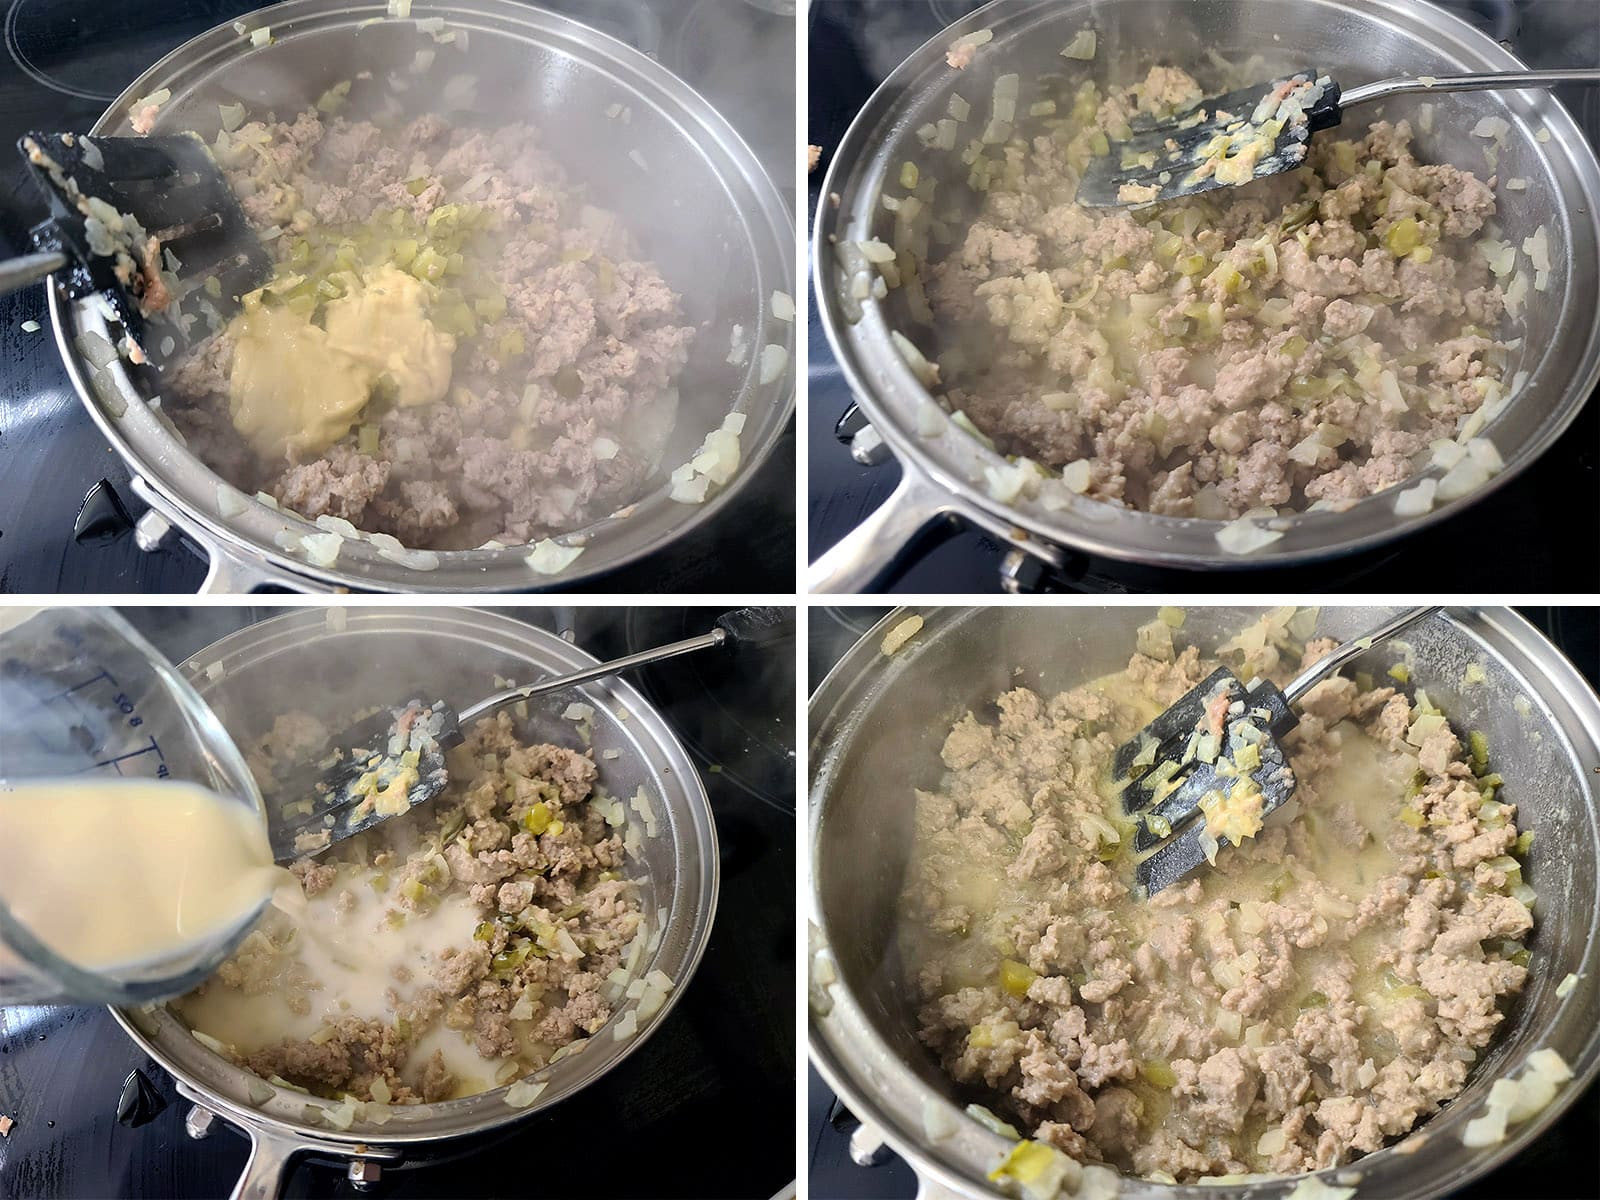 A 4 part image showing the pickles, mustard, and milk being added to the pan.